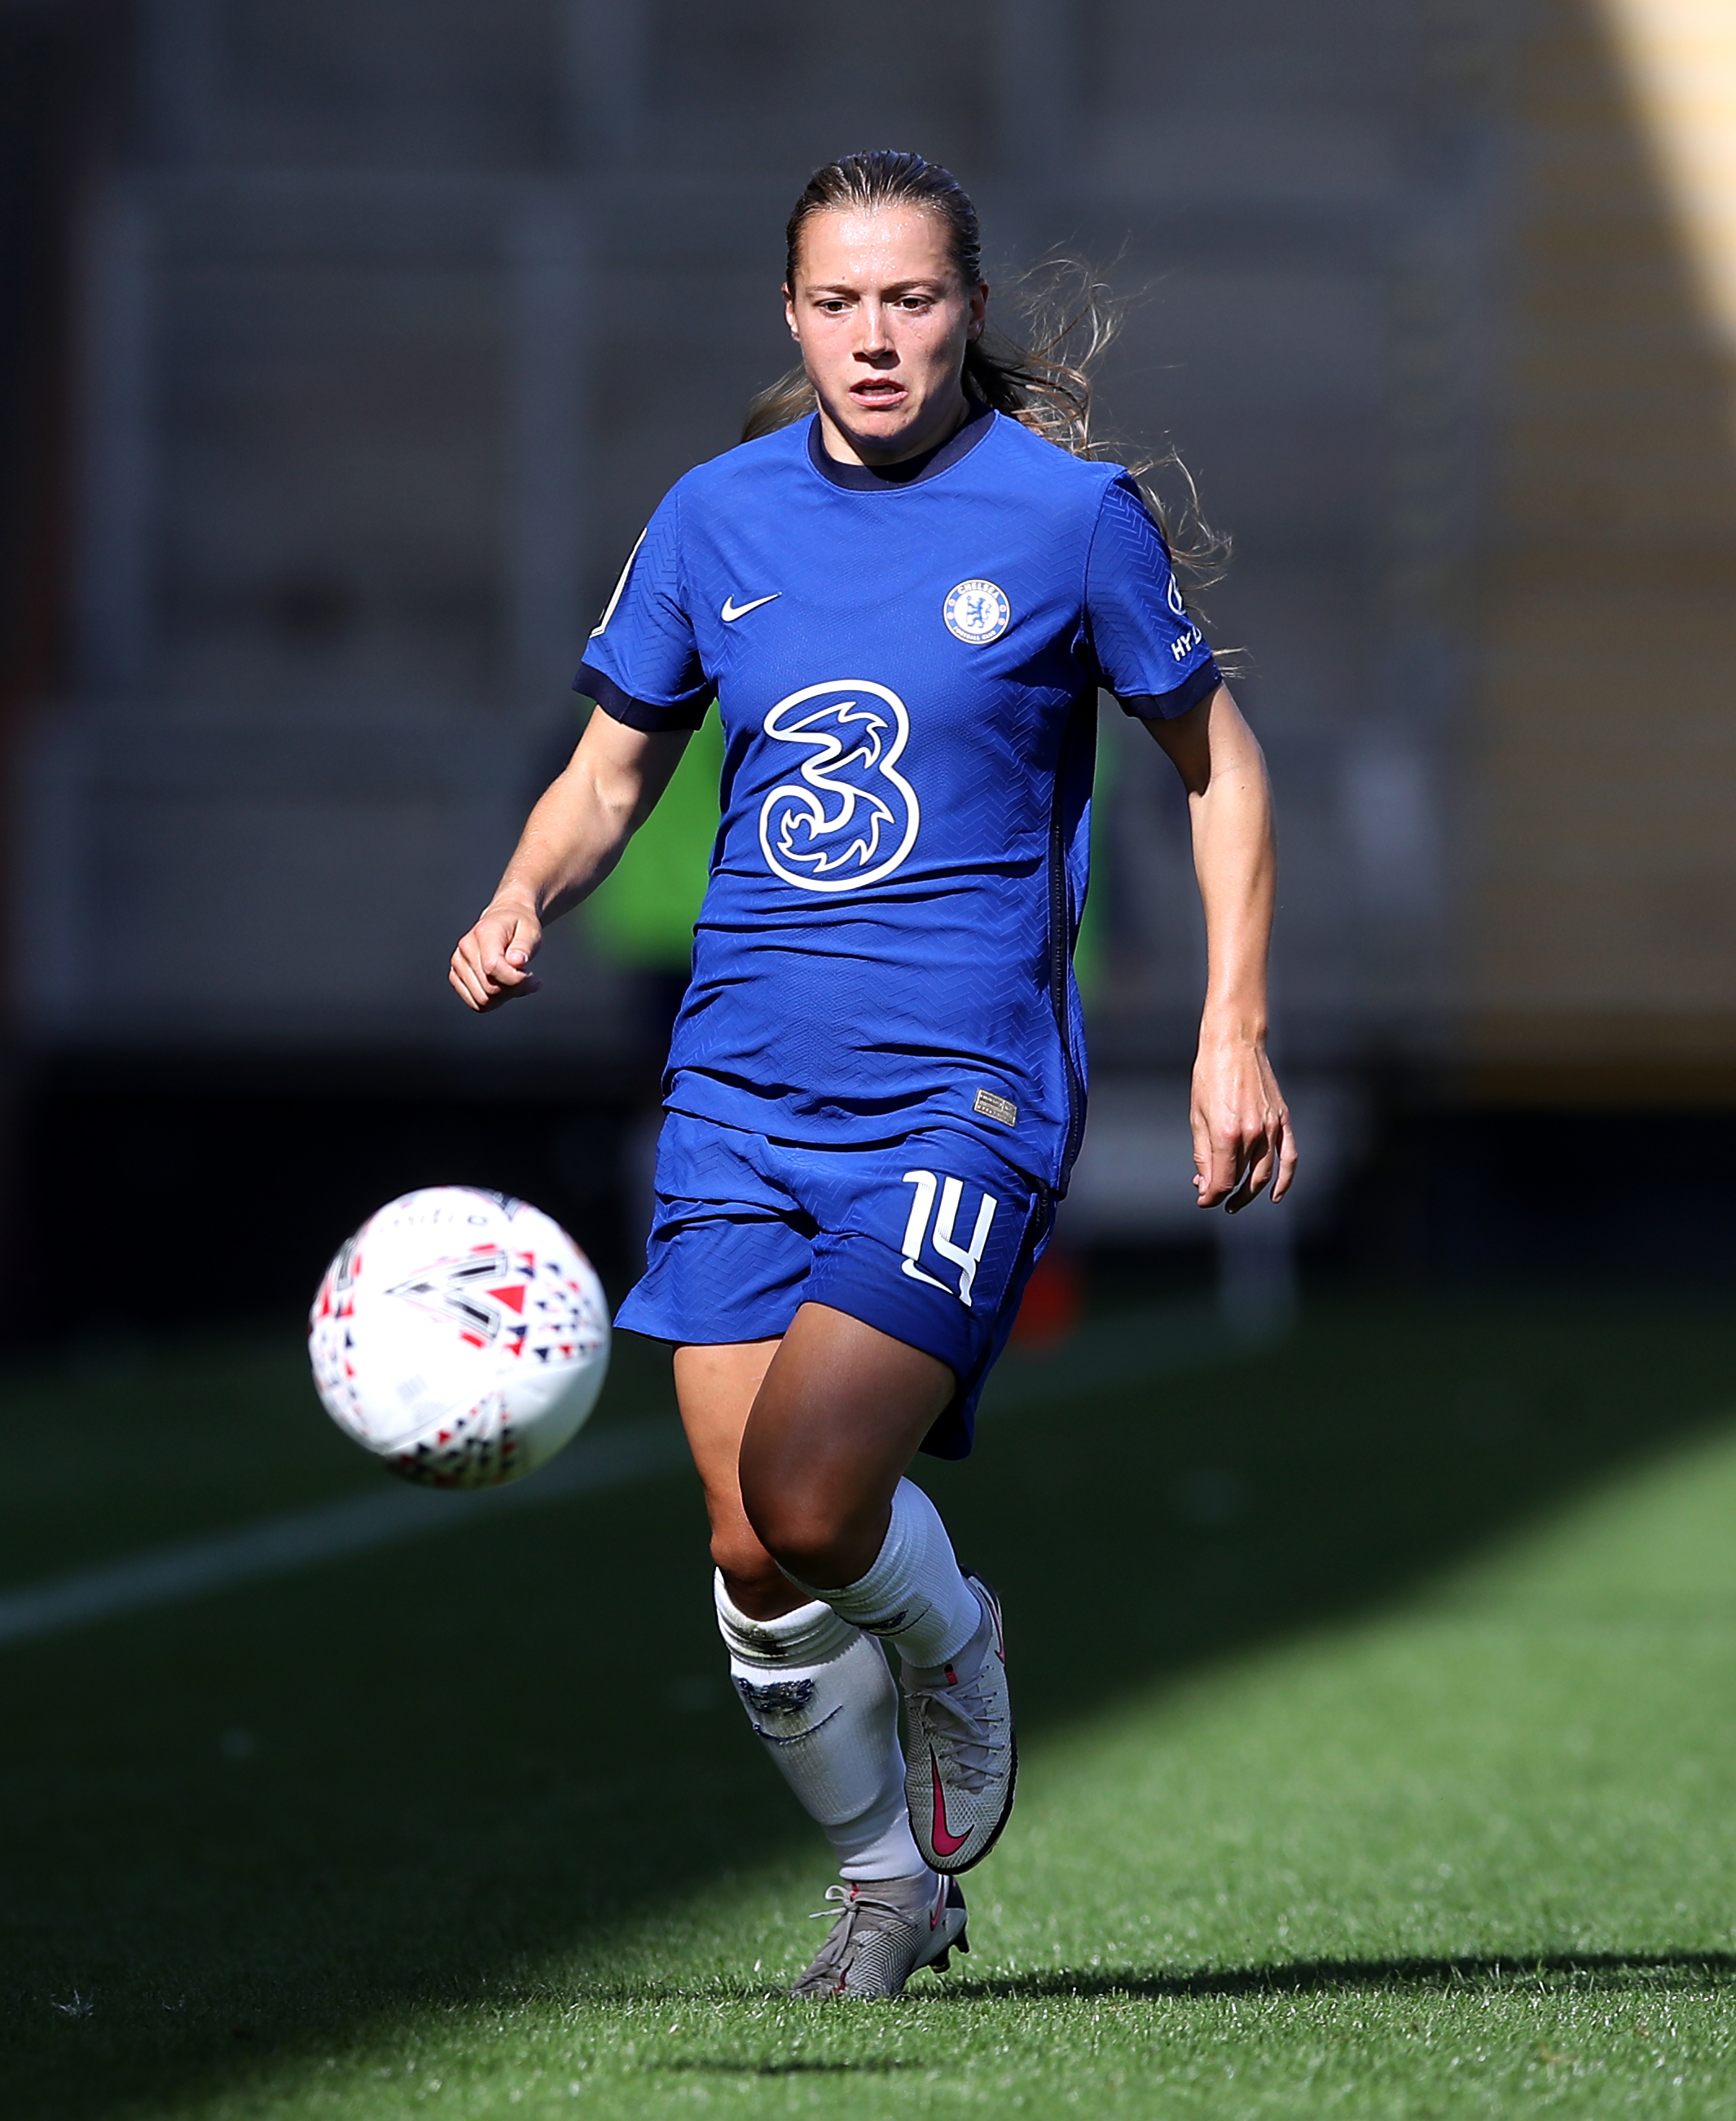 Chelseas Fran Kirby during the FA Womens Super League match at Leigh Sports Village Stadium, Manchester.